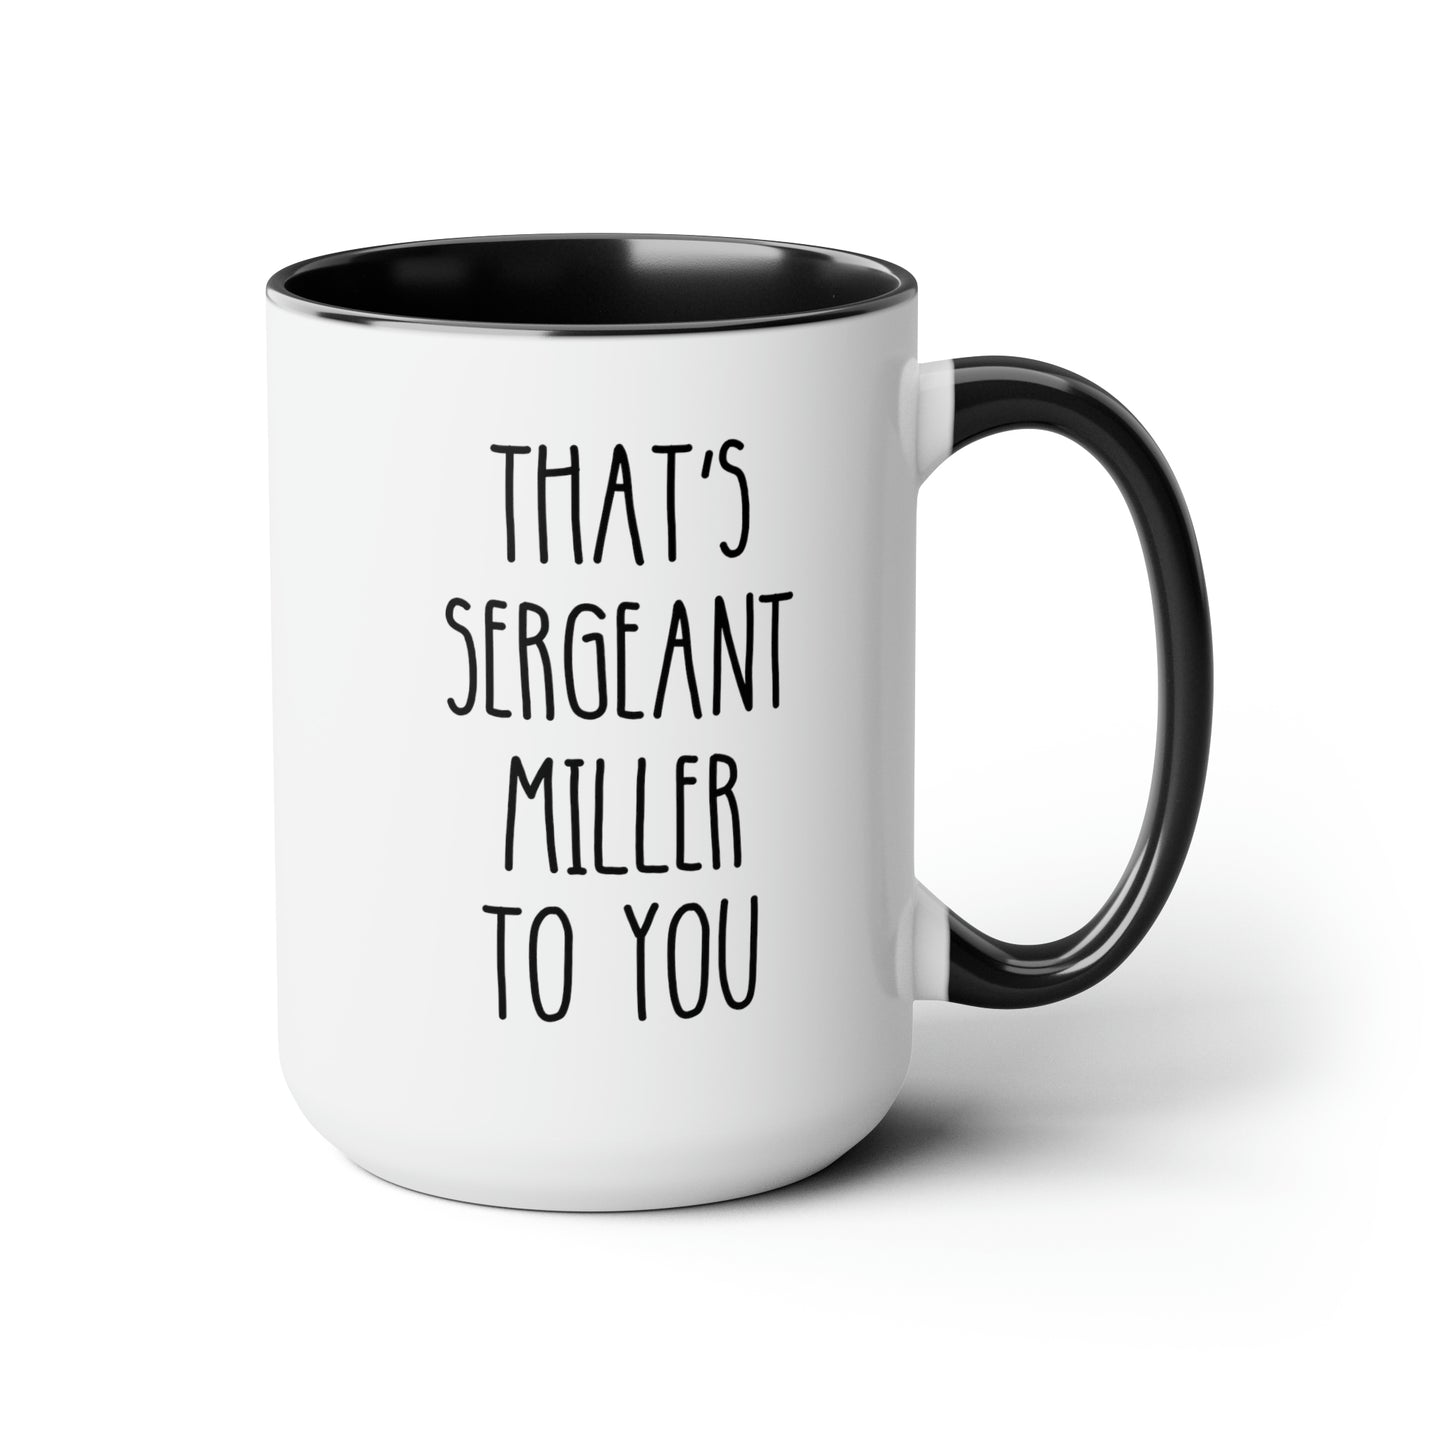 Thats Sergeant Miller To You 15oz white with black accent funny large coffee mug gift for sergeant cop police promotion appreciation gift waveywares wavey wares wavywares wavy wares